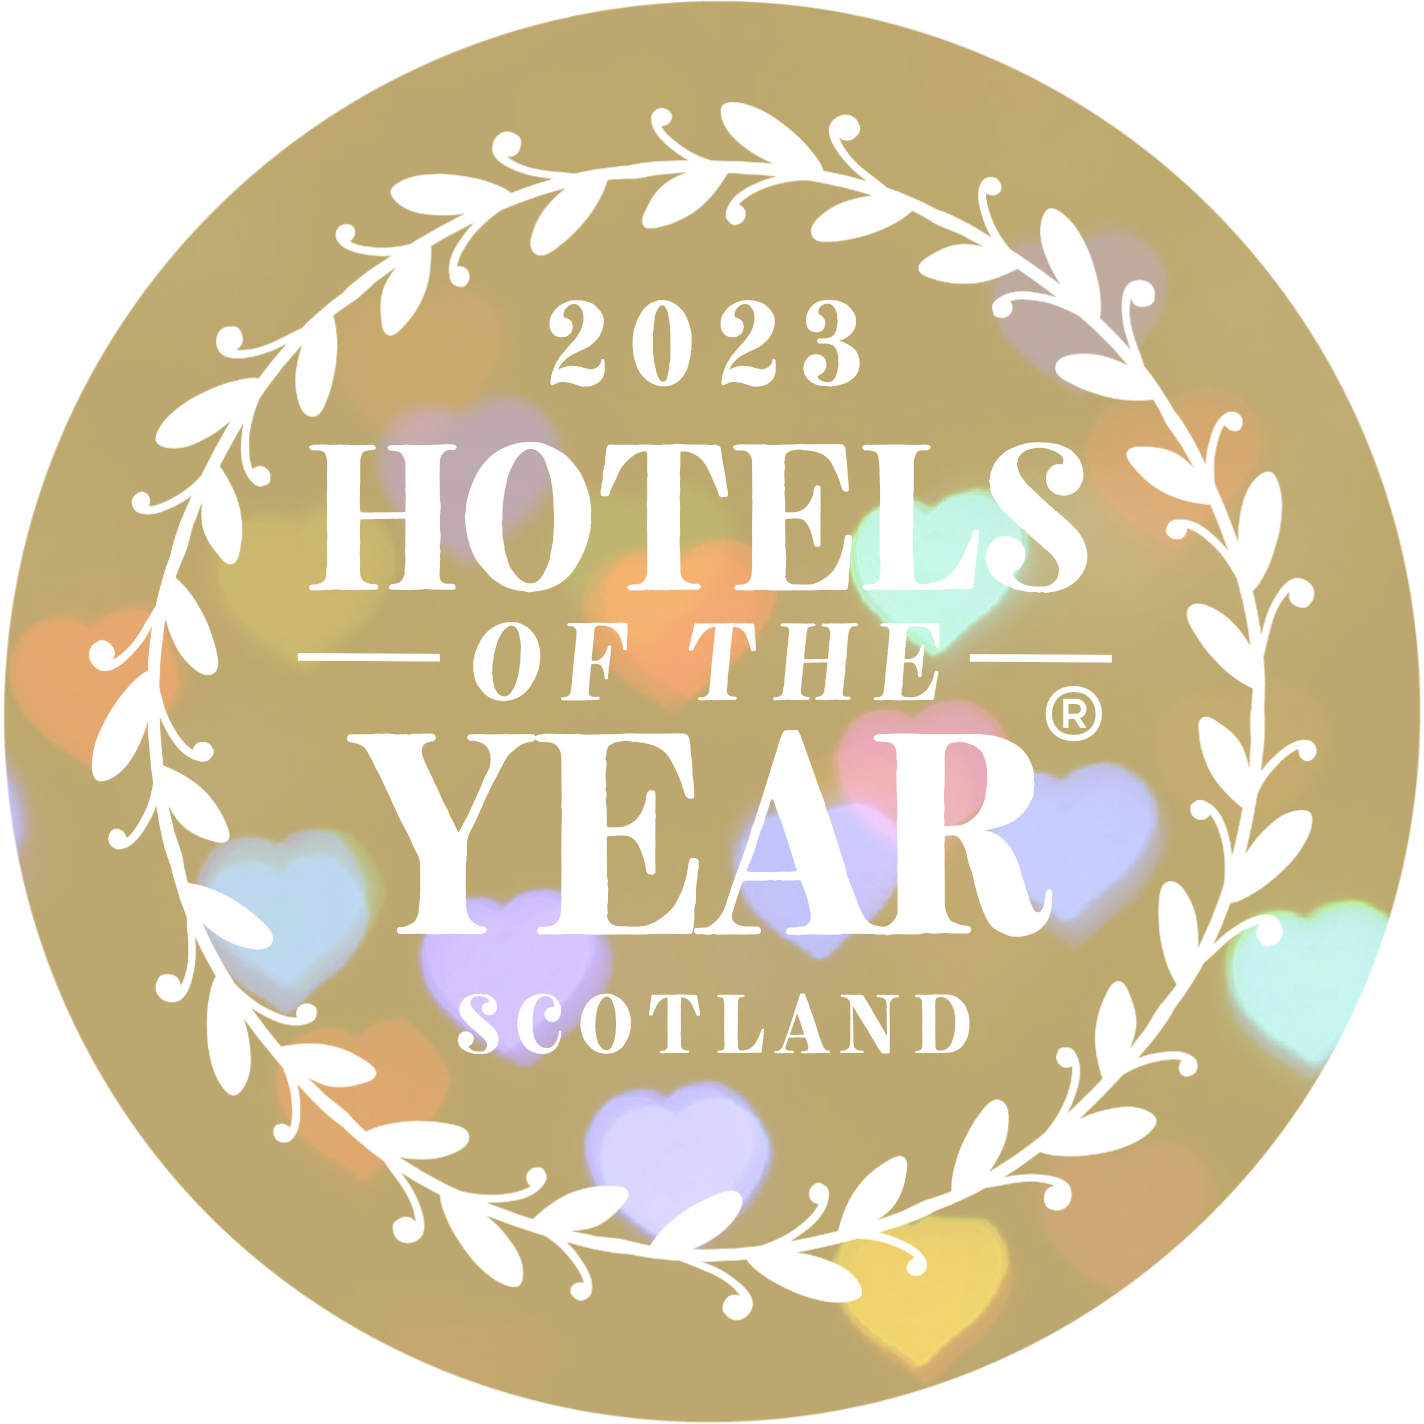 Hotels of the Year 2023 Scotland | Grand Annual Awards Dinner is on 29th October